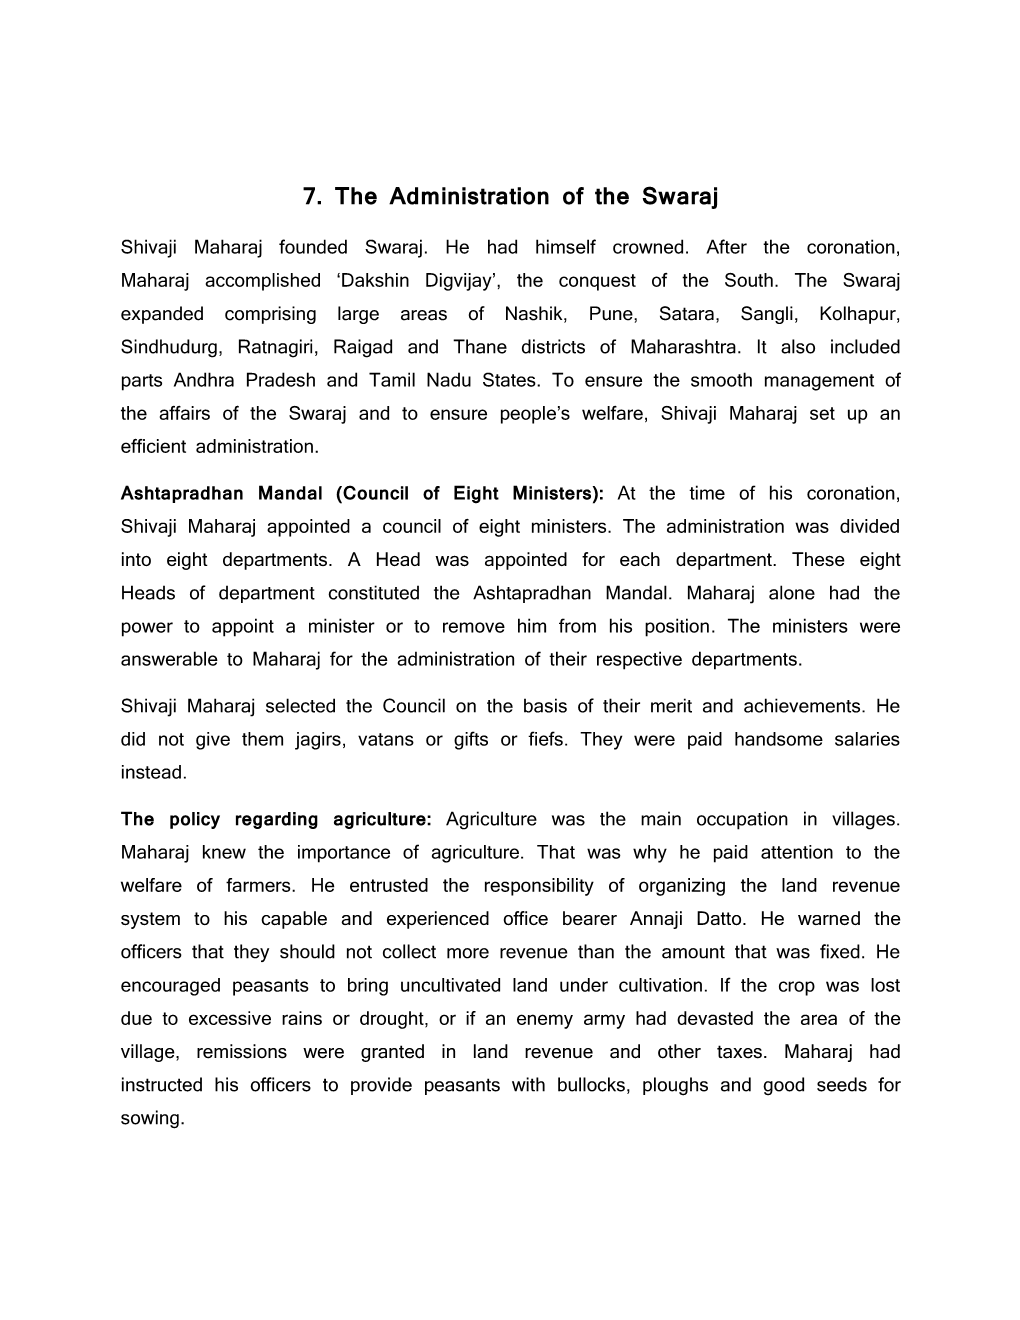 7. the Administration of the Swaraj